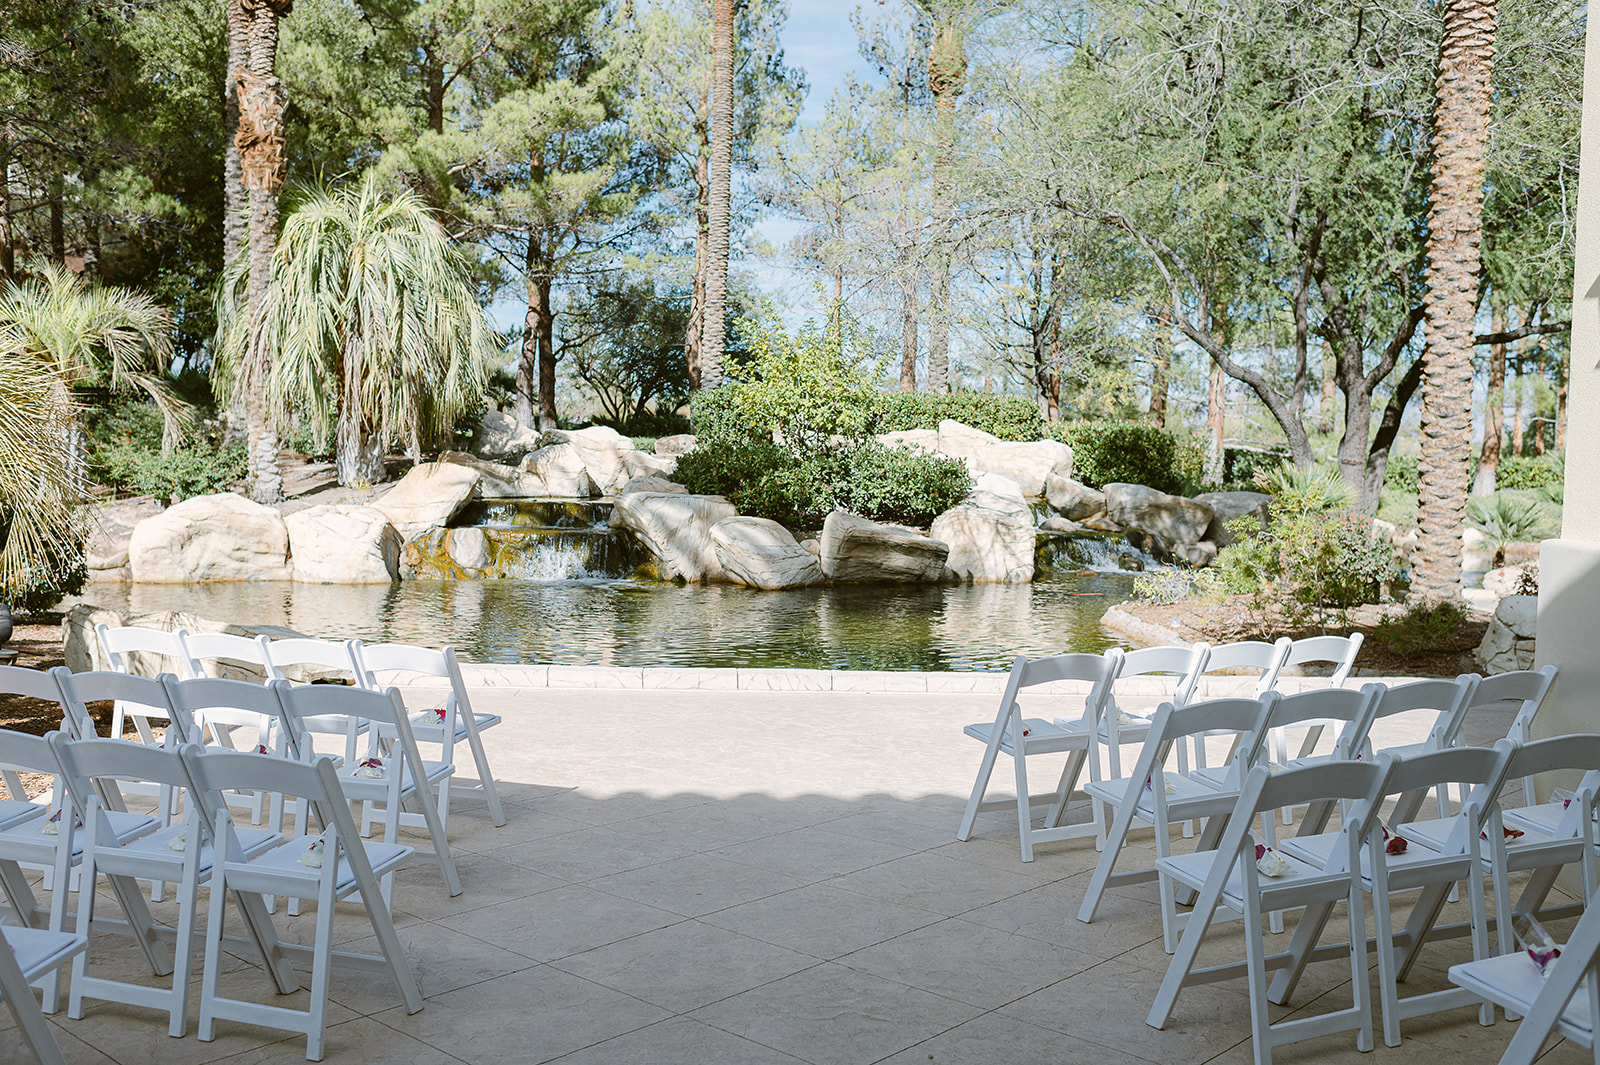 Overview of wedding ceremony venue in front of pond at JW Marriott Las Vegas